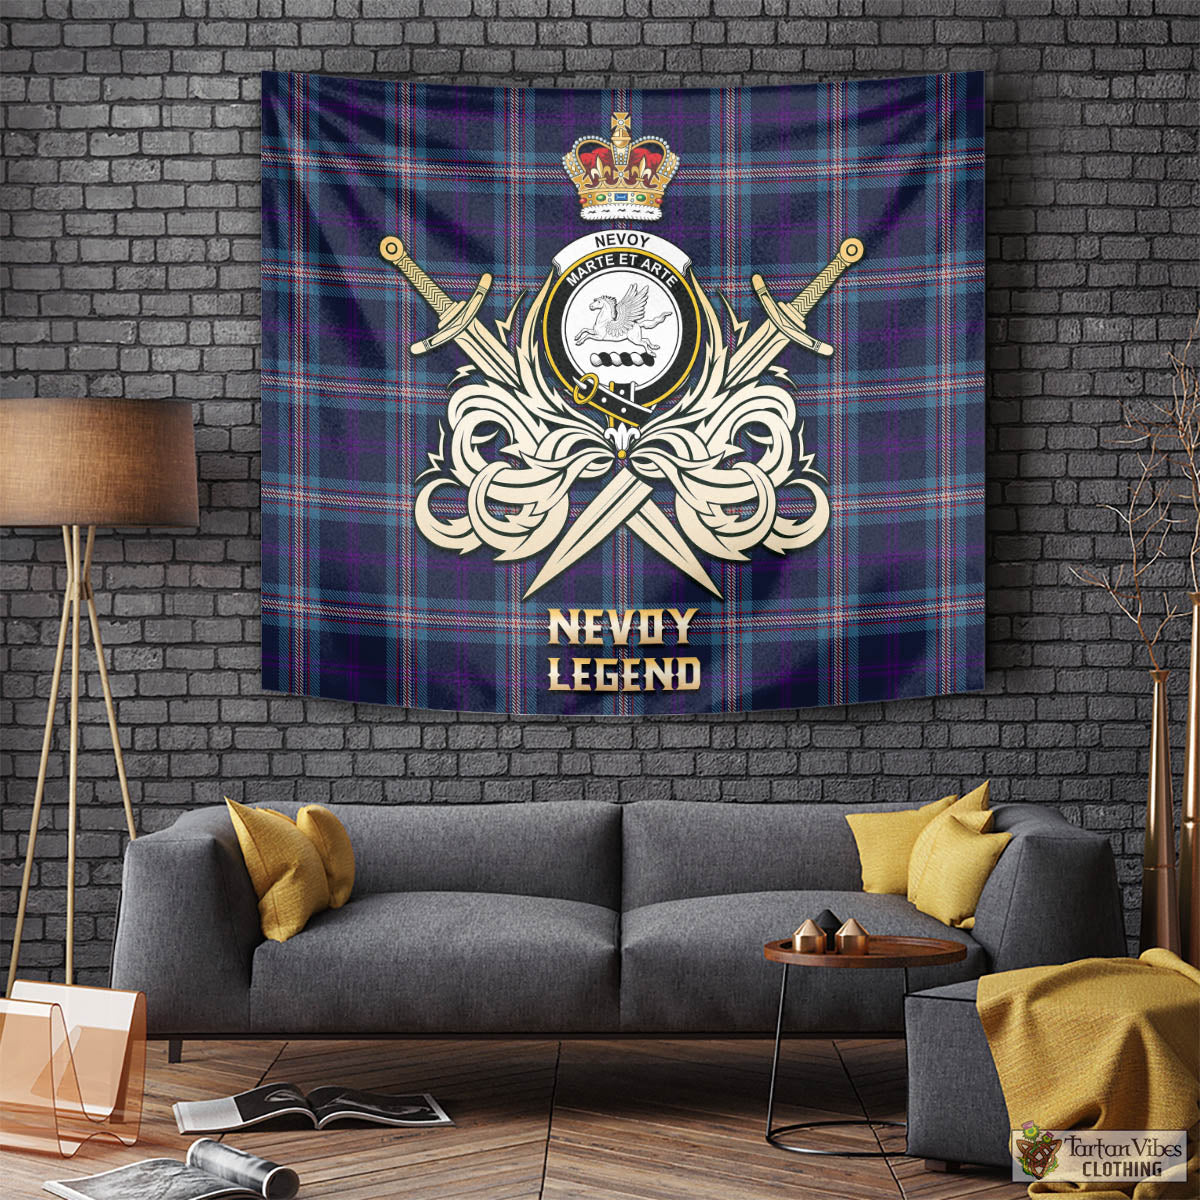 Tartan Vibes Clothing Nevoy Tartan Tapestry with Clan Crest and the Golden Sword of Courageous Legacy